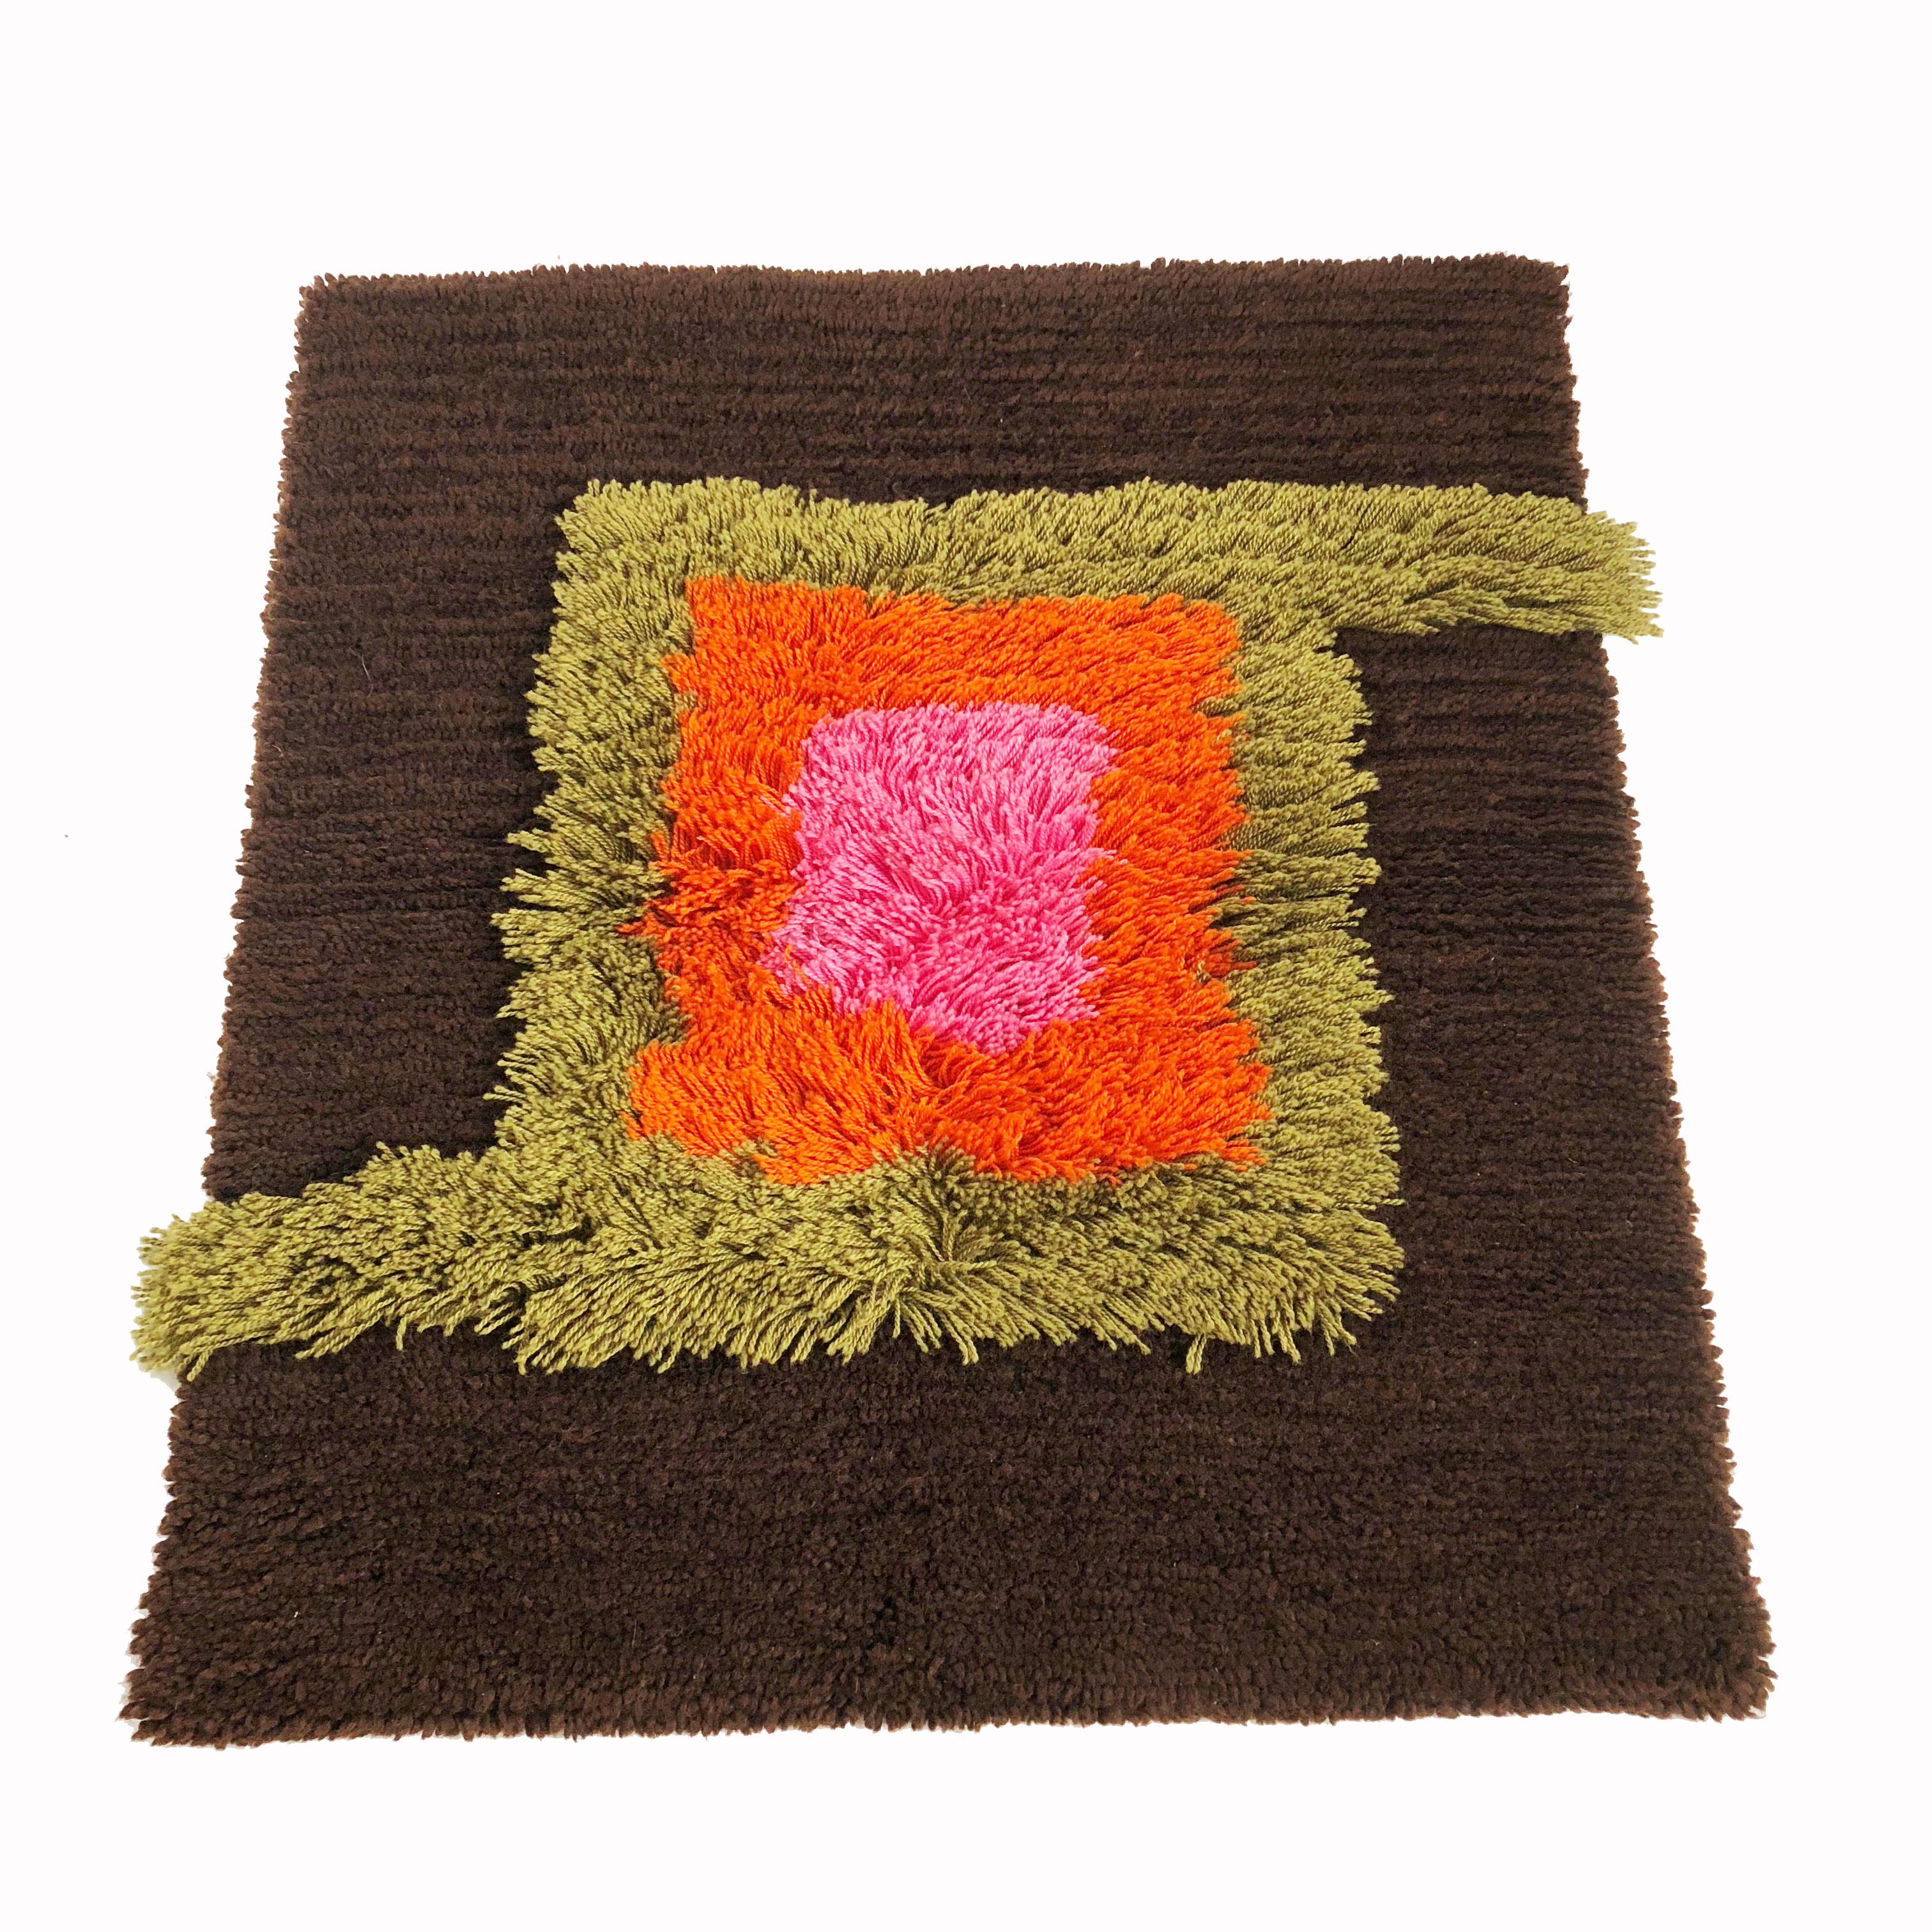 20th Century Modernist German Wall Rug by Cromwell Tefzet, Design by S. Doege, Germany, 1970s